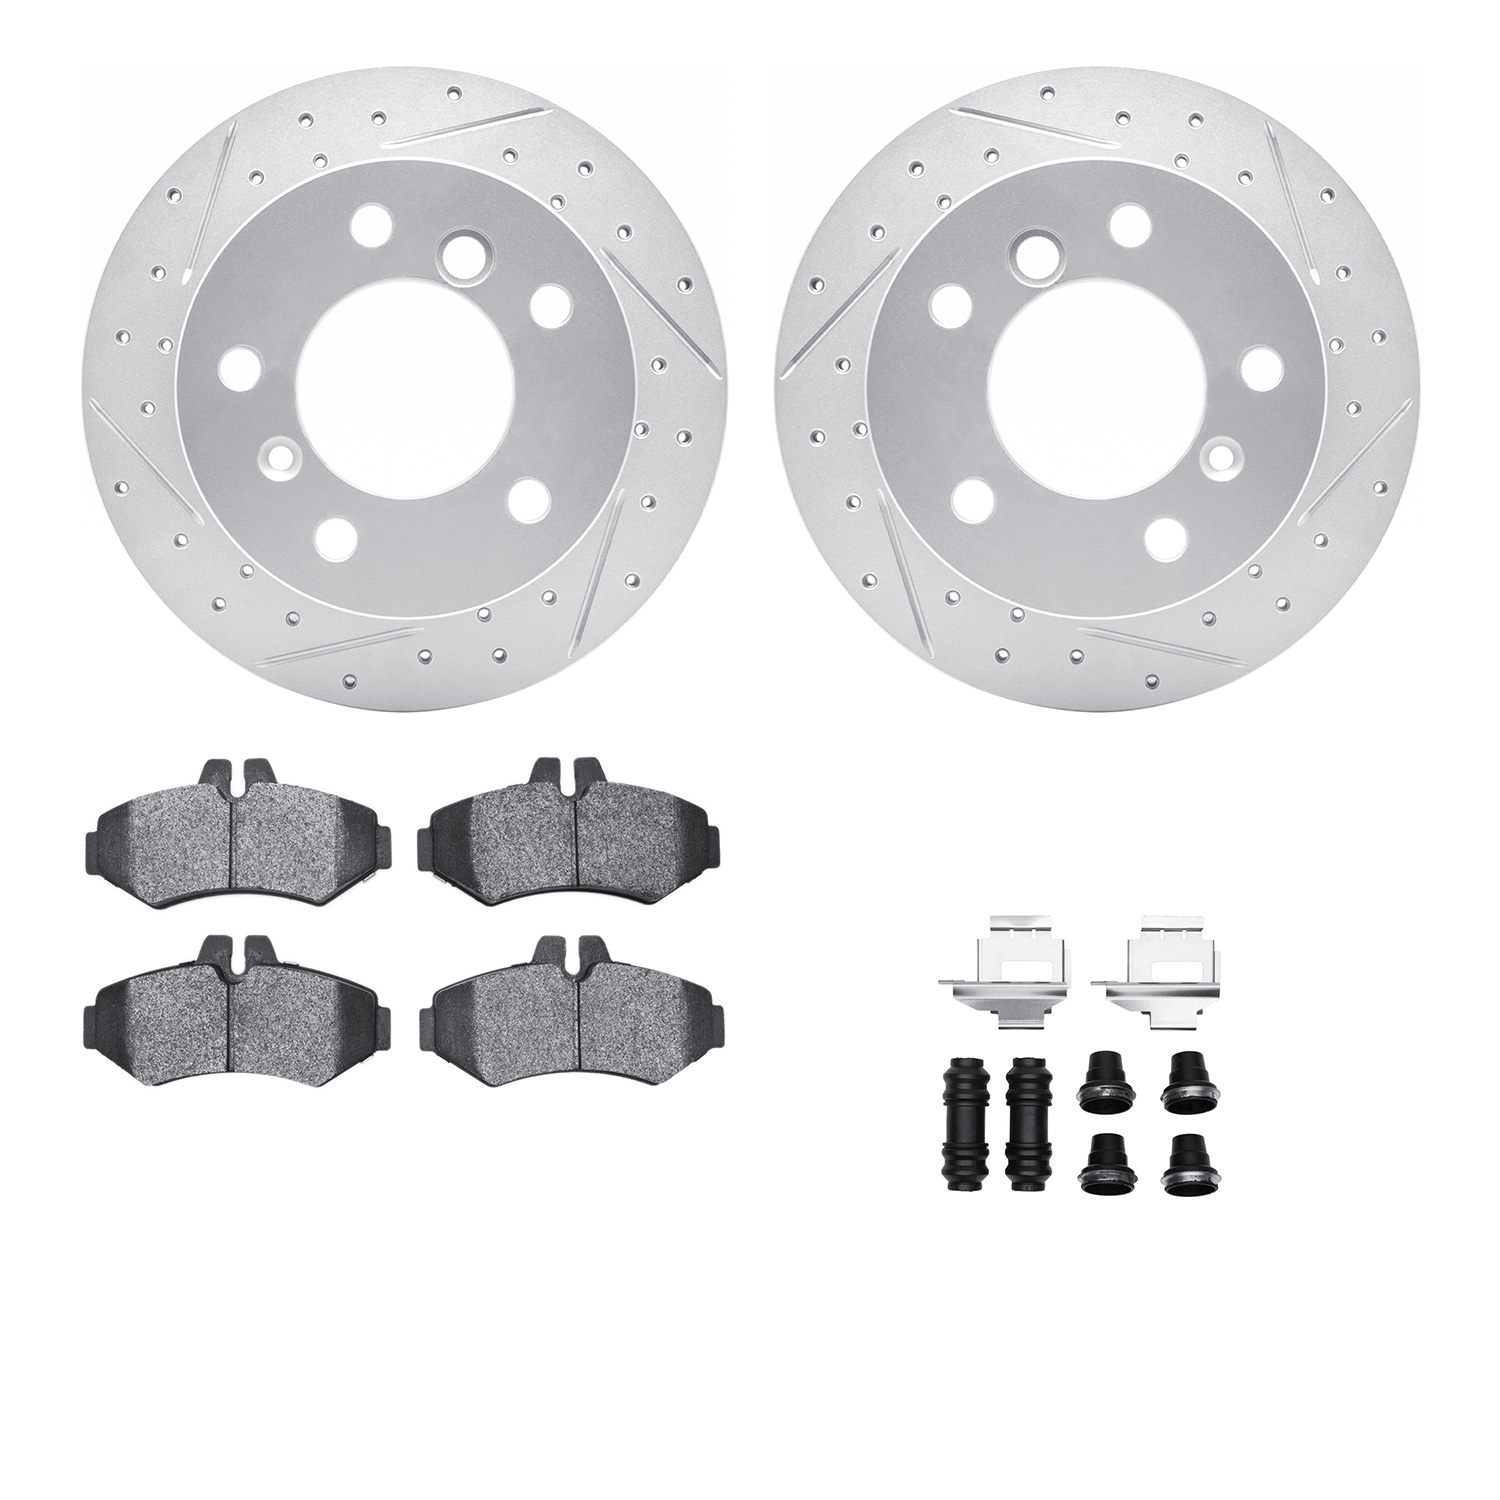 2212-40018 Geoperformance Drilled/Slotted Rotors w/Heavy-Duty Pads Kit & Hardware, 2002-2018 Multiple Makes/Models, Position: Re